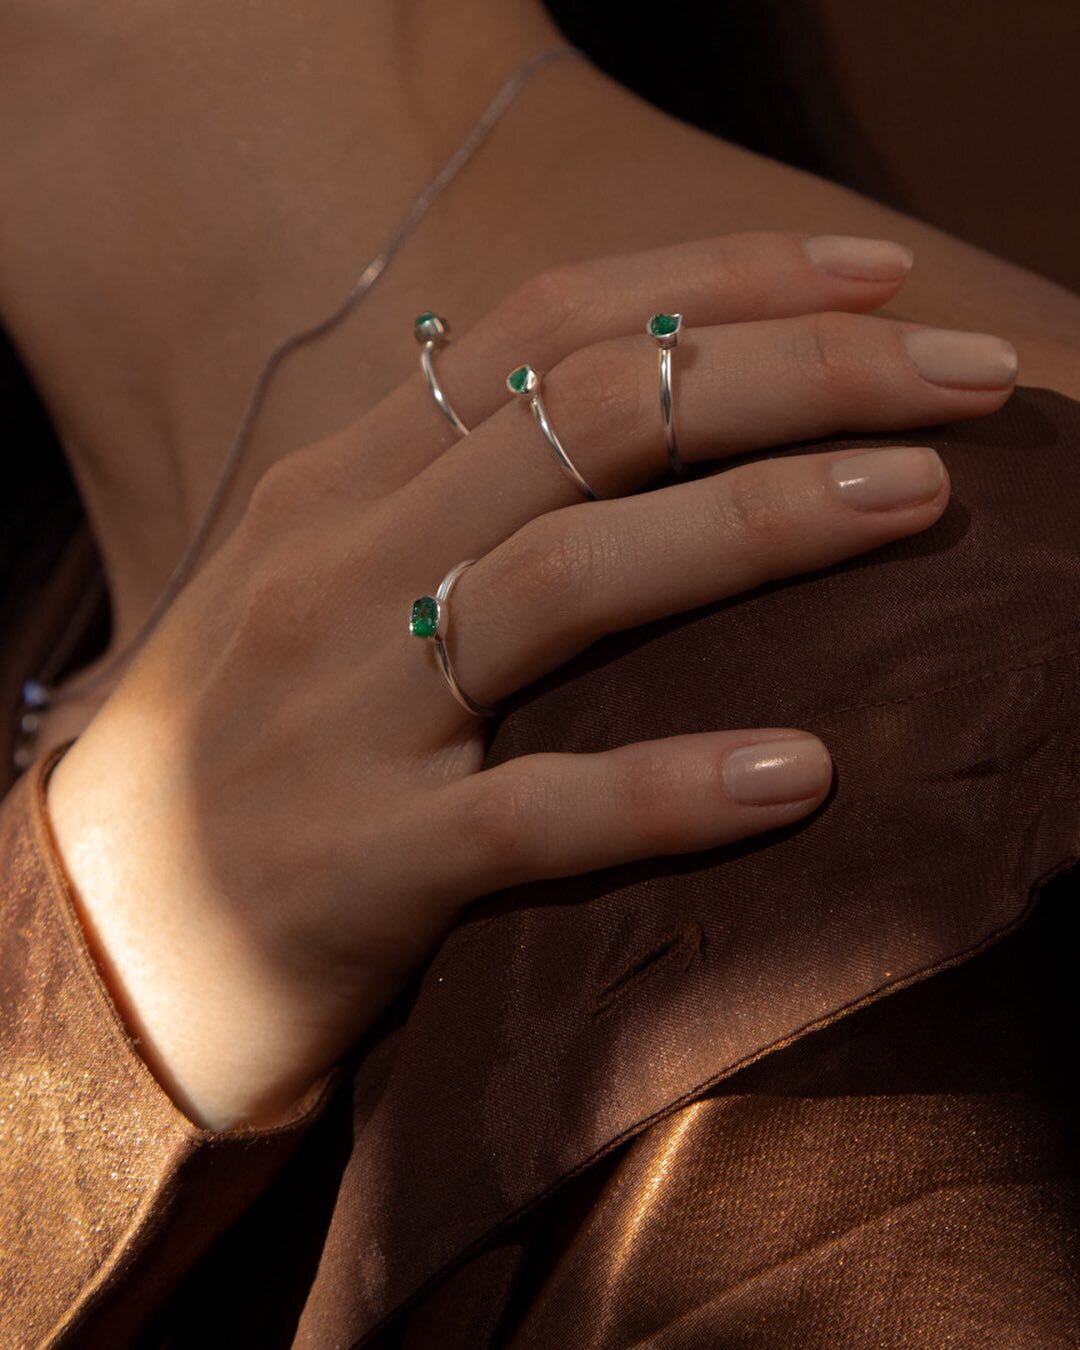 Hi there! How&rsquo;s your summer going? 
Silver emerald rings are always on my must have list! 
They&rsquo;re just do easy to match with any outfit!
Do you want a reel on how to match this babies for different occasions? 
Let me know in comments🔥
.